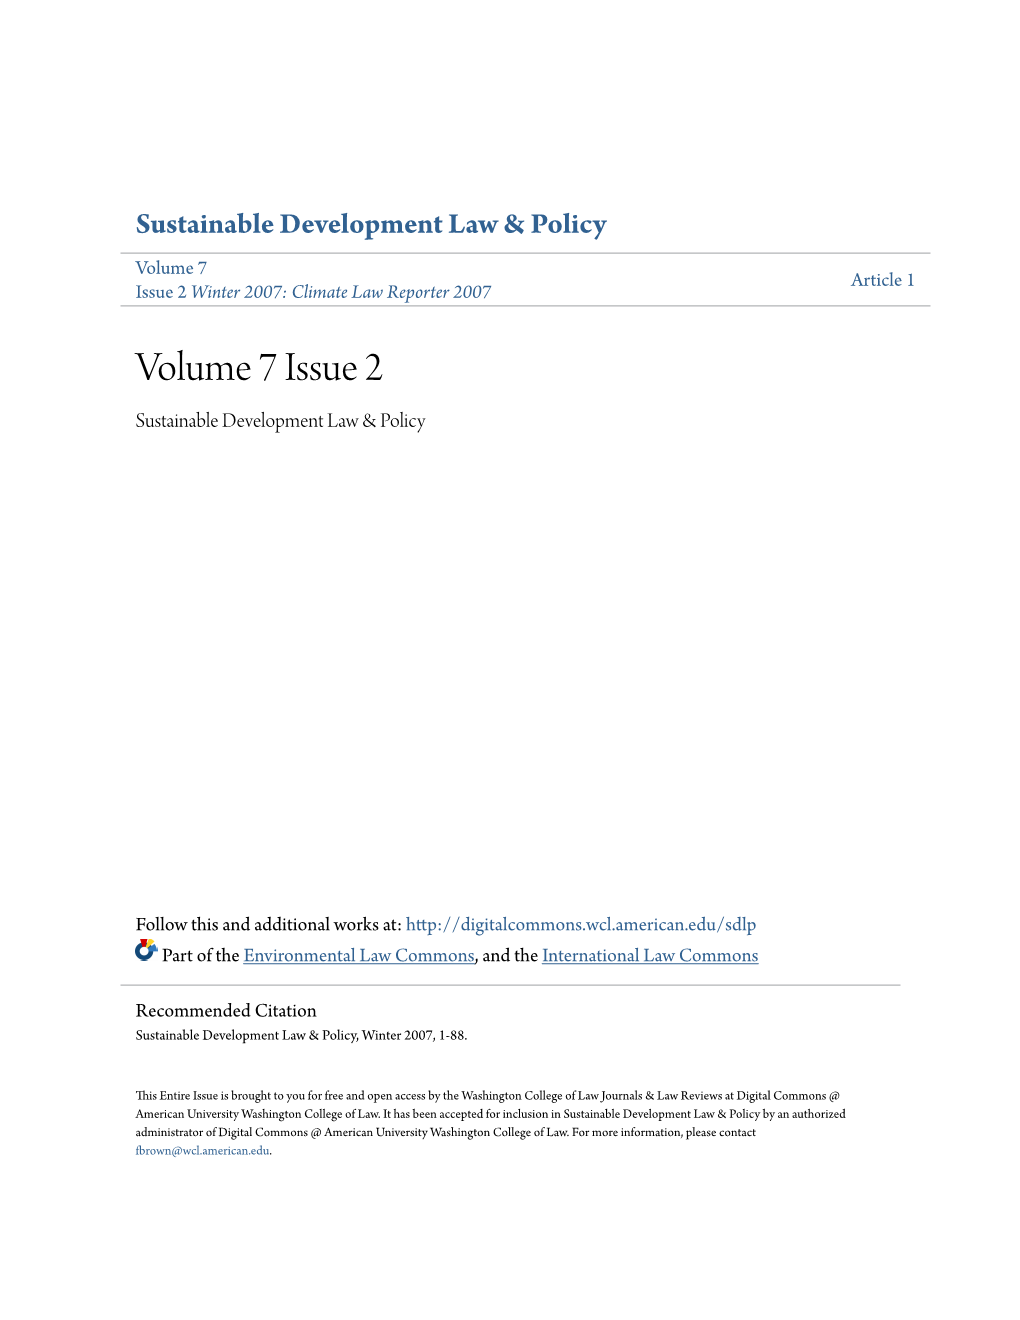 Volume 7 Issue 2 Sustainable Development Law & Policy